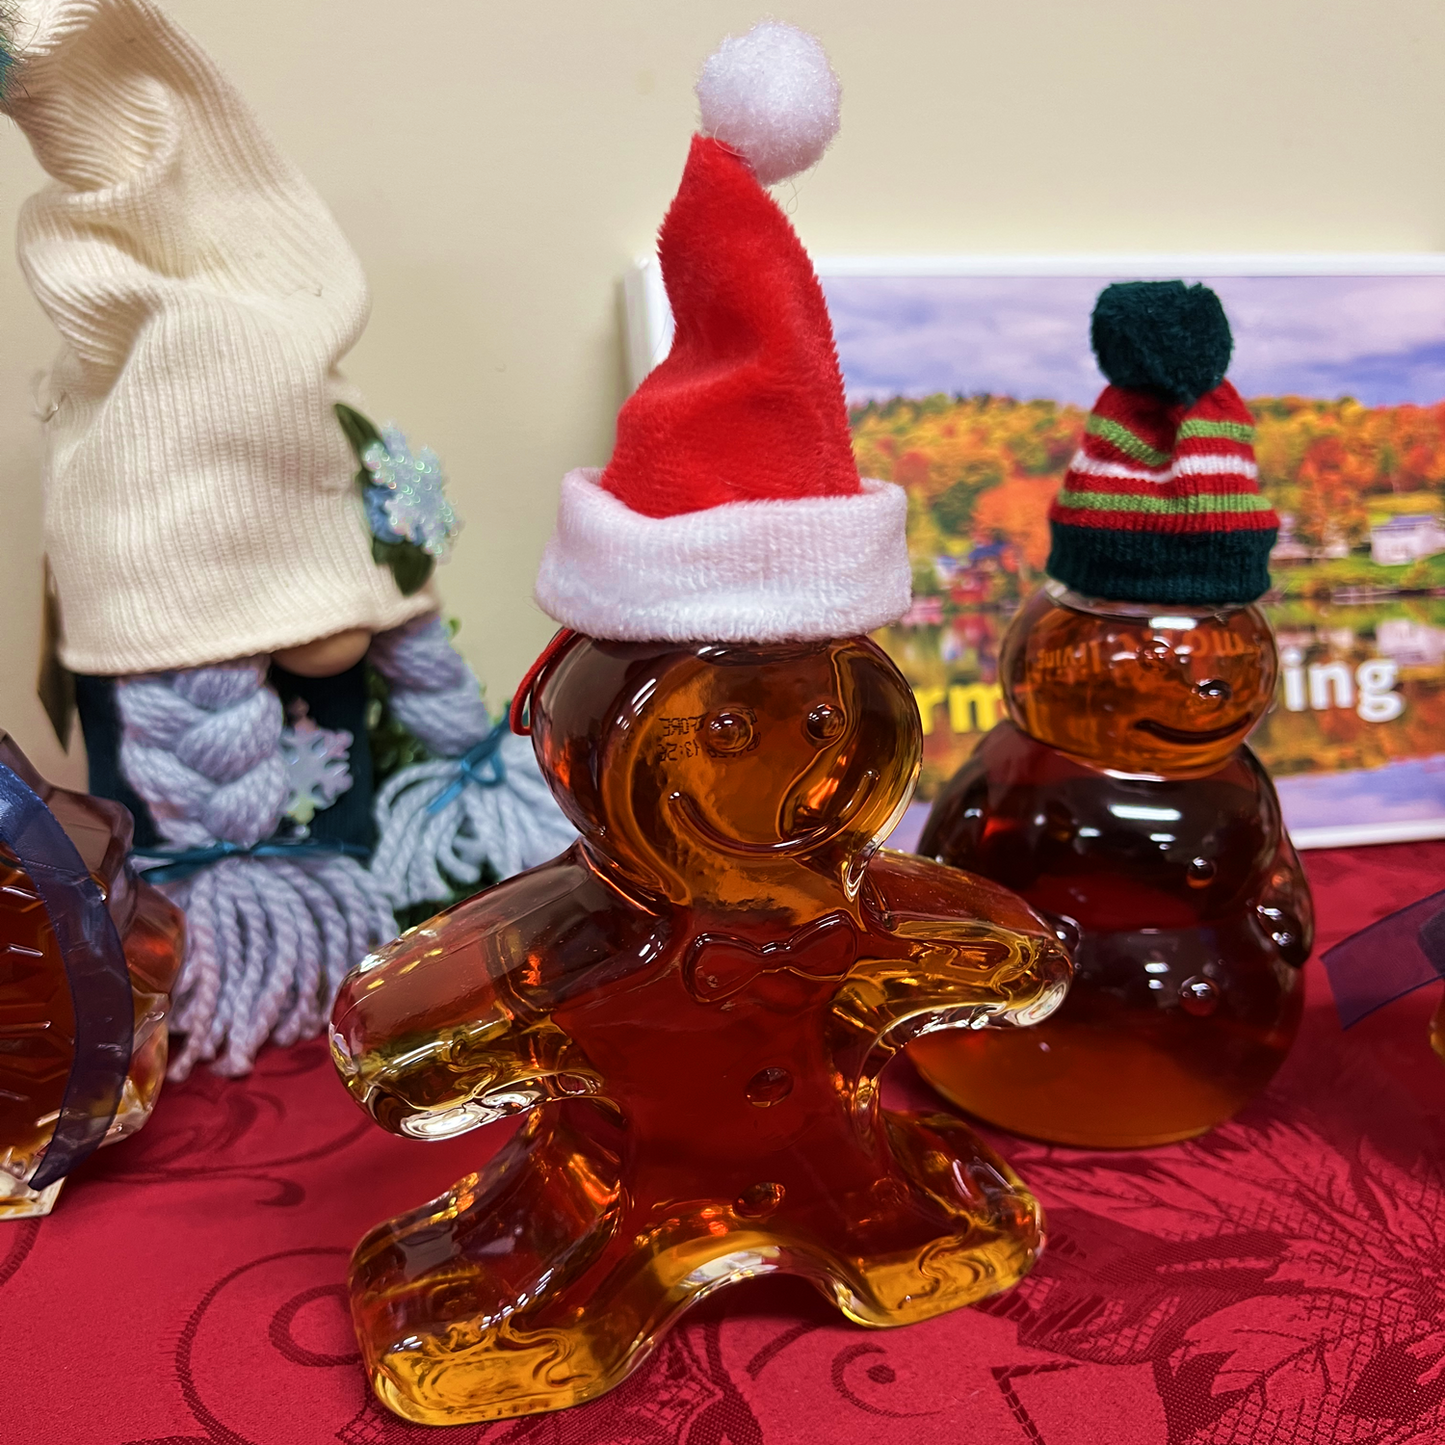 Gingerbread Man Maple Syrup Bottle, 8.45 oz. - Limited Edition